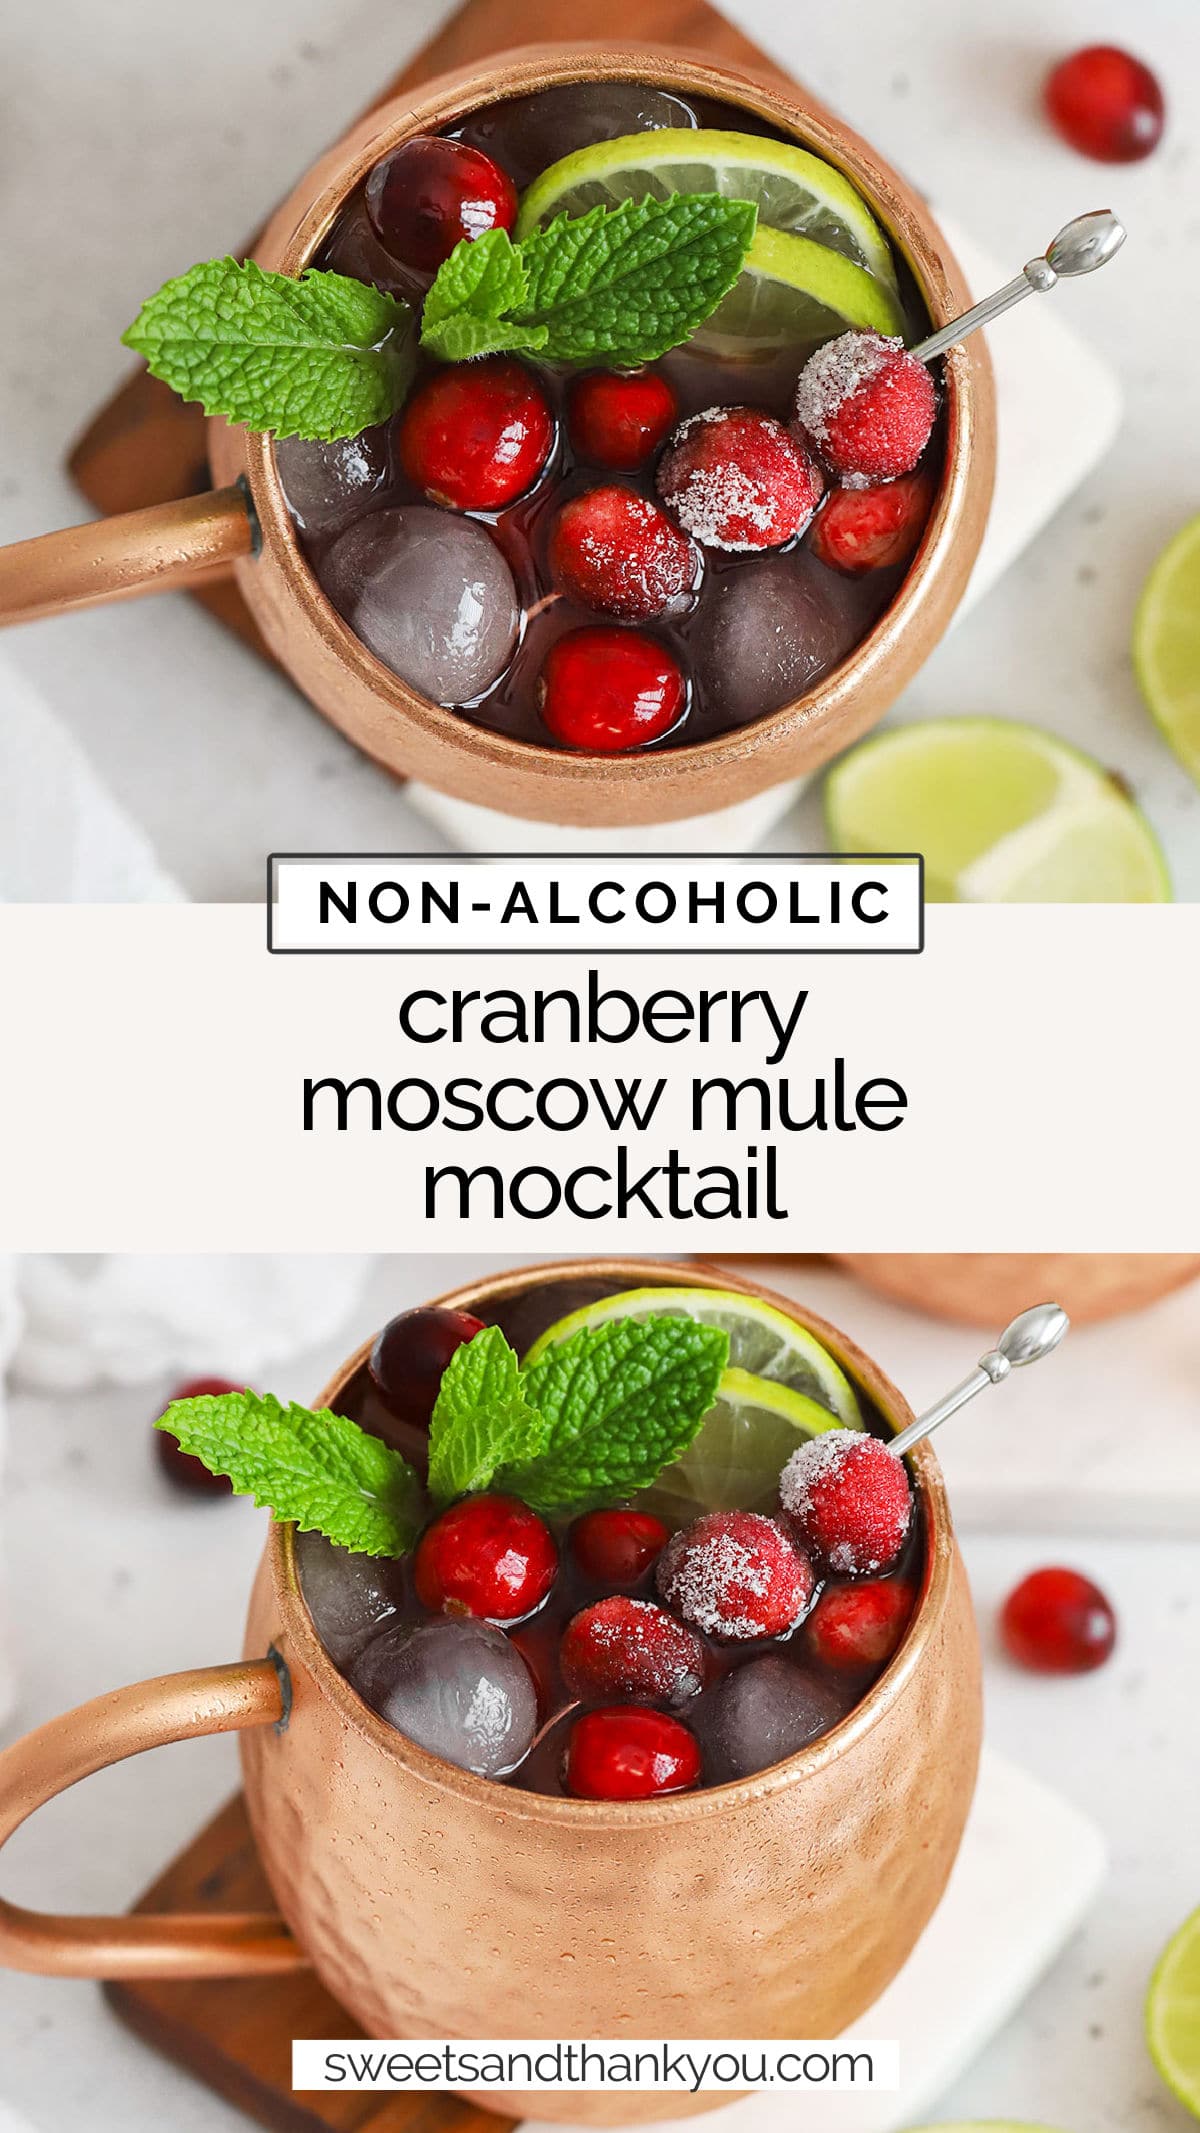 Our festive Cranberry Moscow Mule Mocktail recipe is a perfect holiday drink. With a fizzy mix of fresh & warm flavors and fun seasonal colors, it's the perfect holiday mocktail recipe!

non-alcoholic holiday drinks / cranberry mocktail recipe / moscow mule mocktail / cranberry drink / holiday drink recipe / non alcoholic holiday drink recipe / christmas mocktail / thanksgiving mocktail / red mocktail